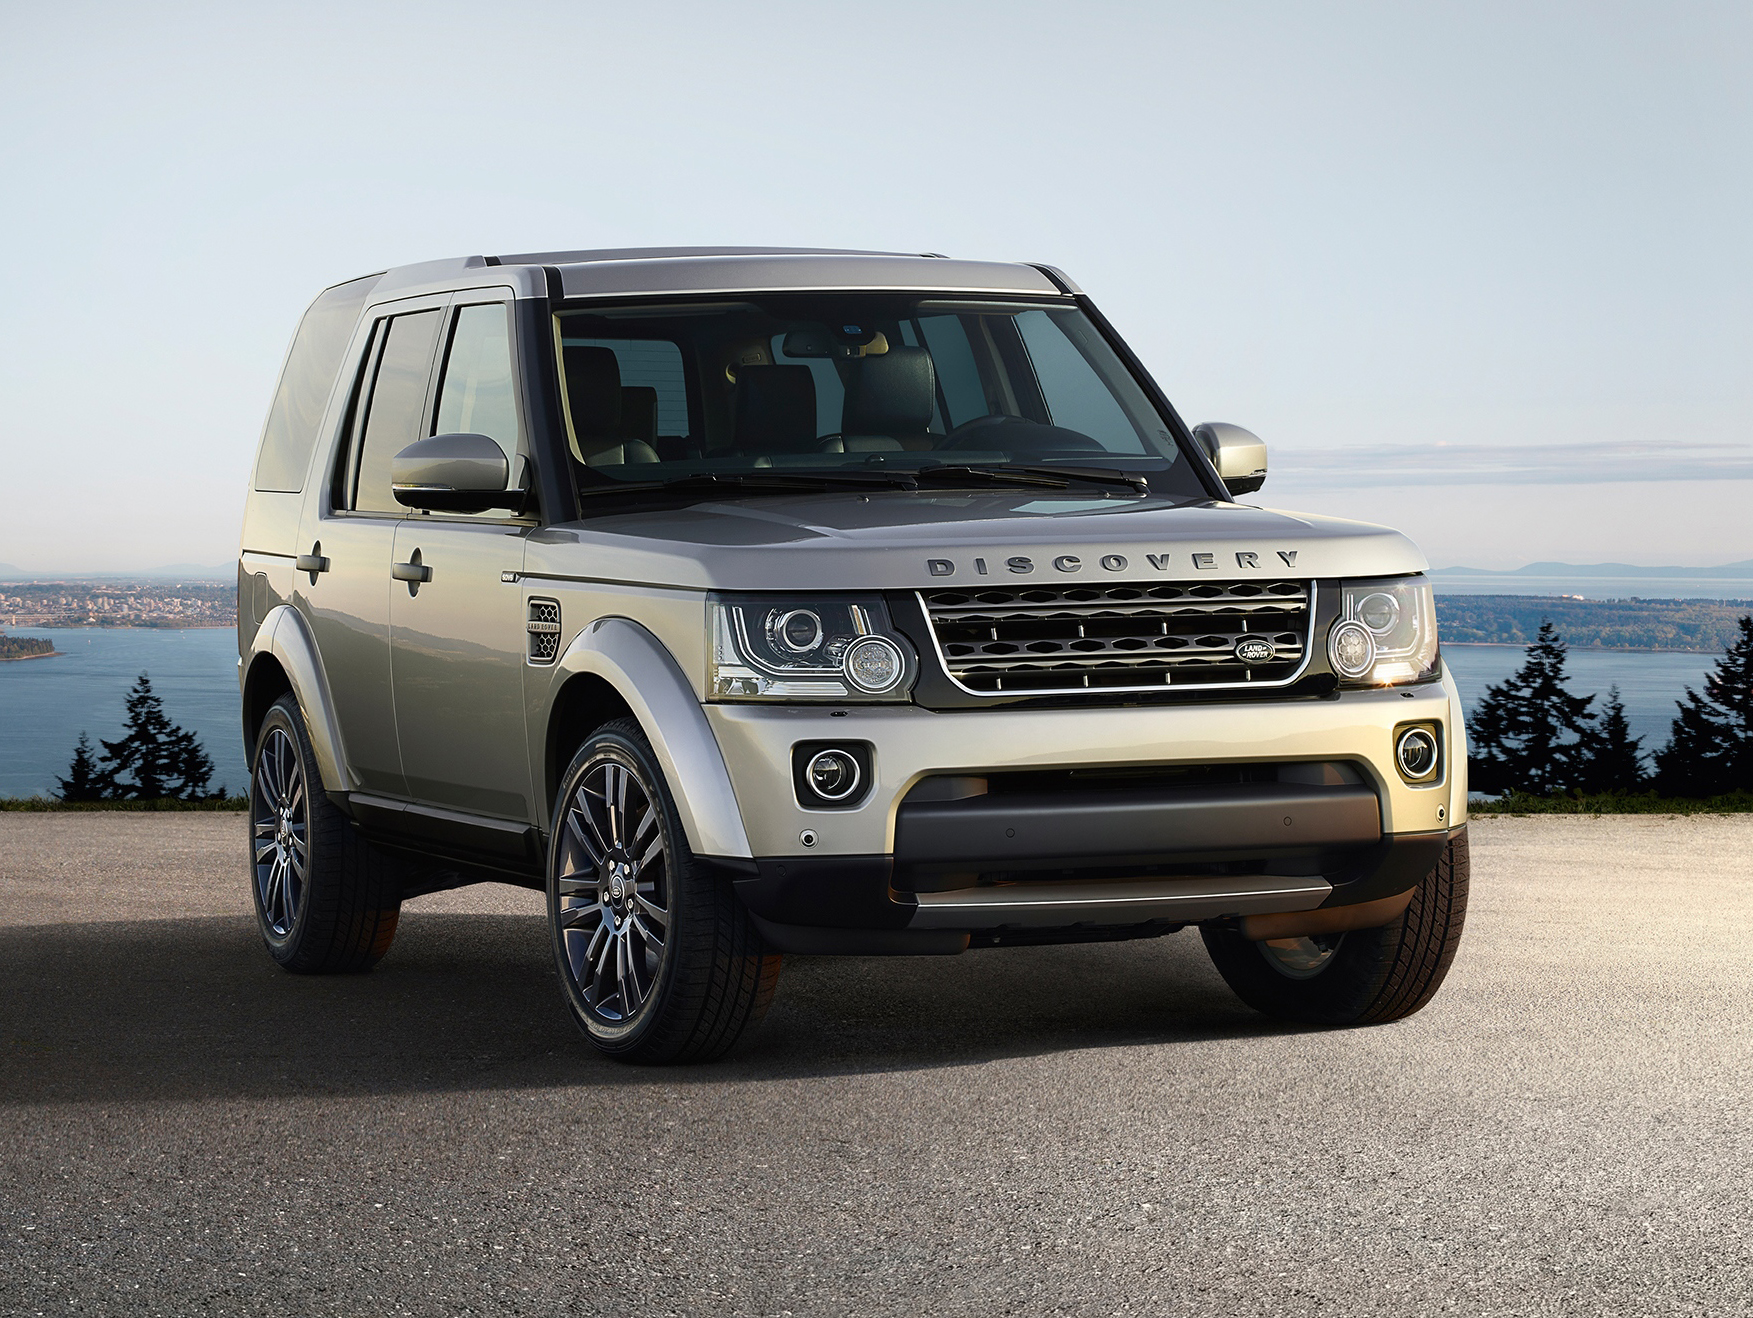 New Land Rover Discovery models revealed